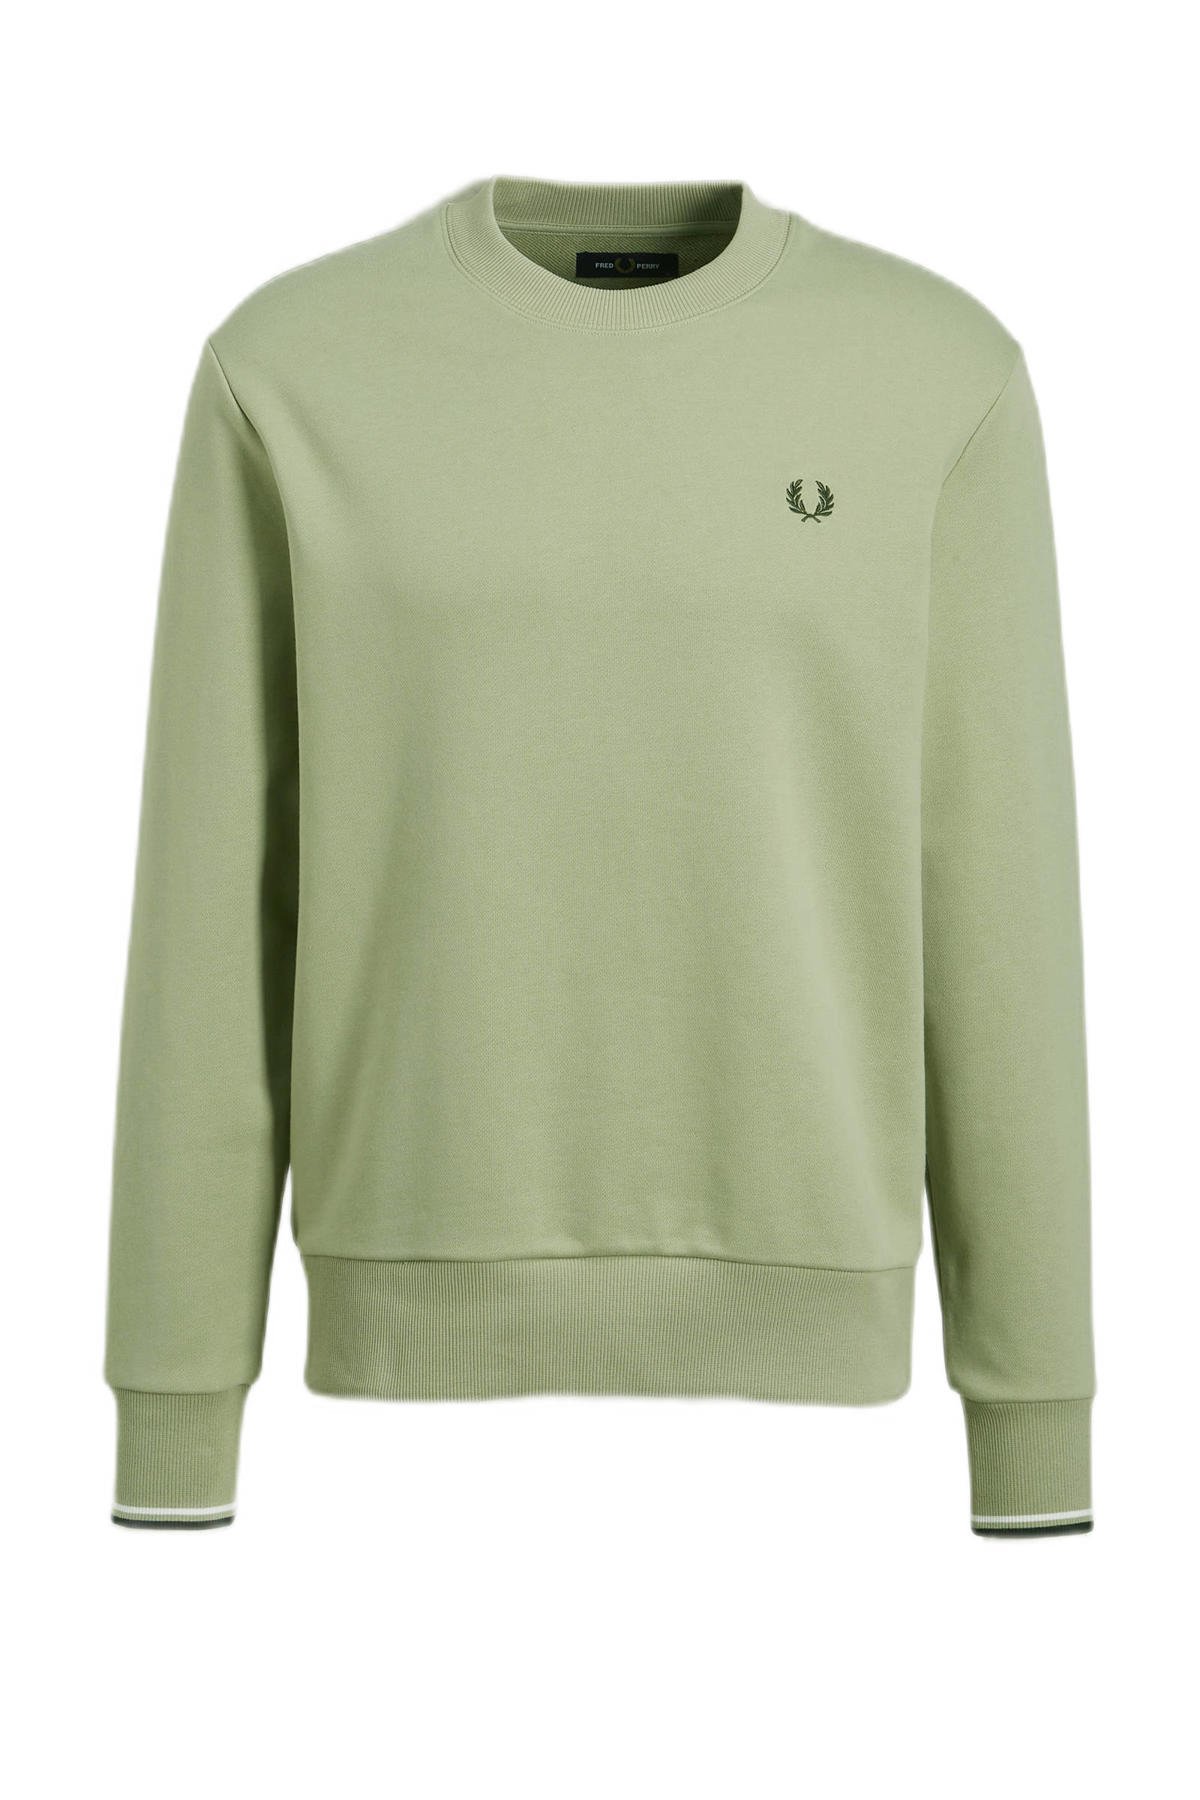 theorie hypothese speer Fred Perry sweater met logo seagrass | wehkamp